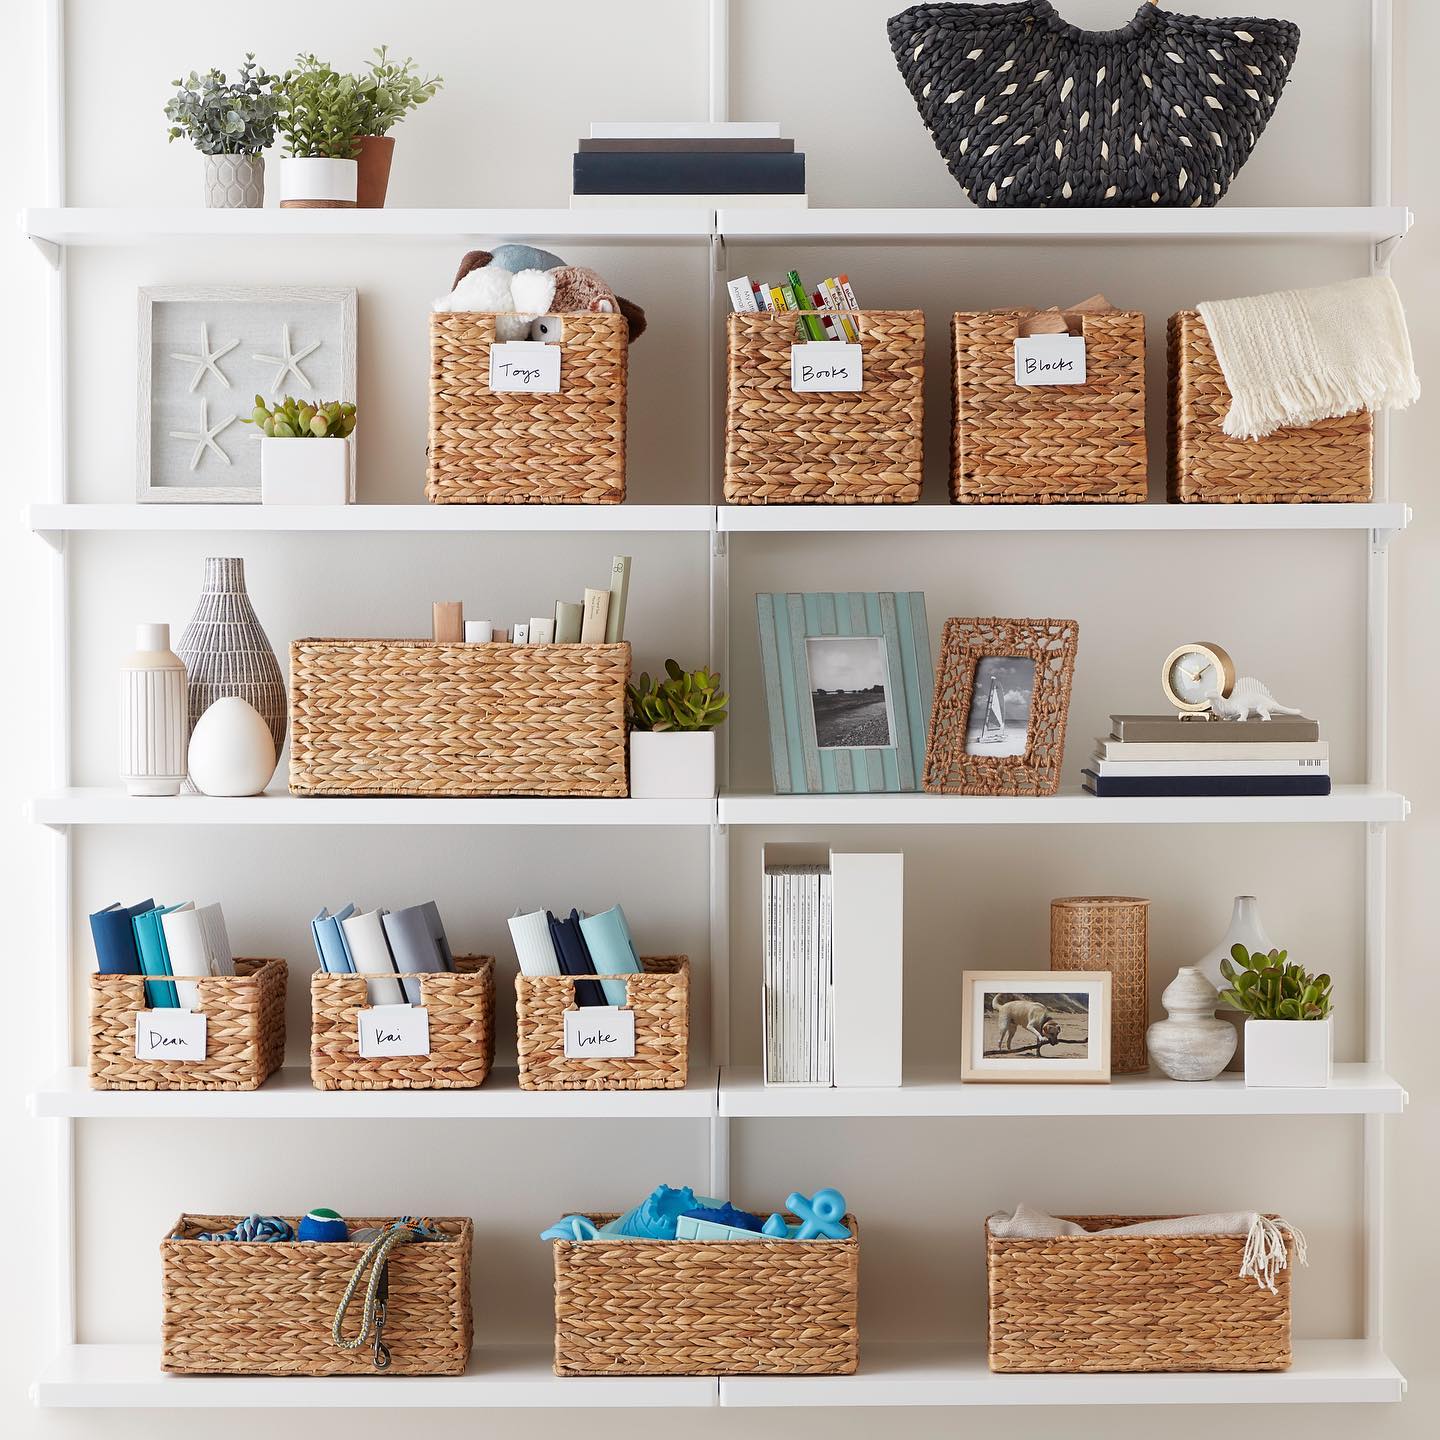 Organizing bins on shelves. Photo by Instagram user @thecontainerstore